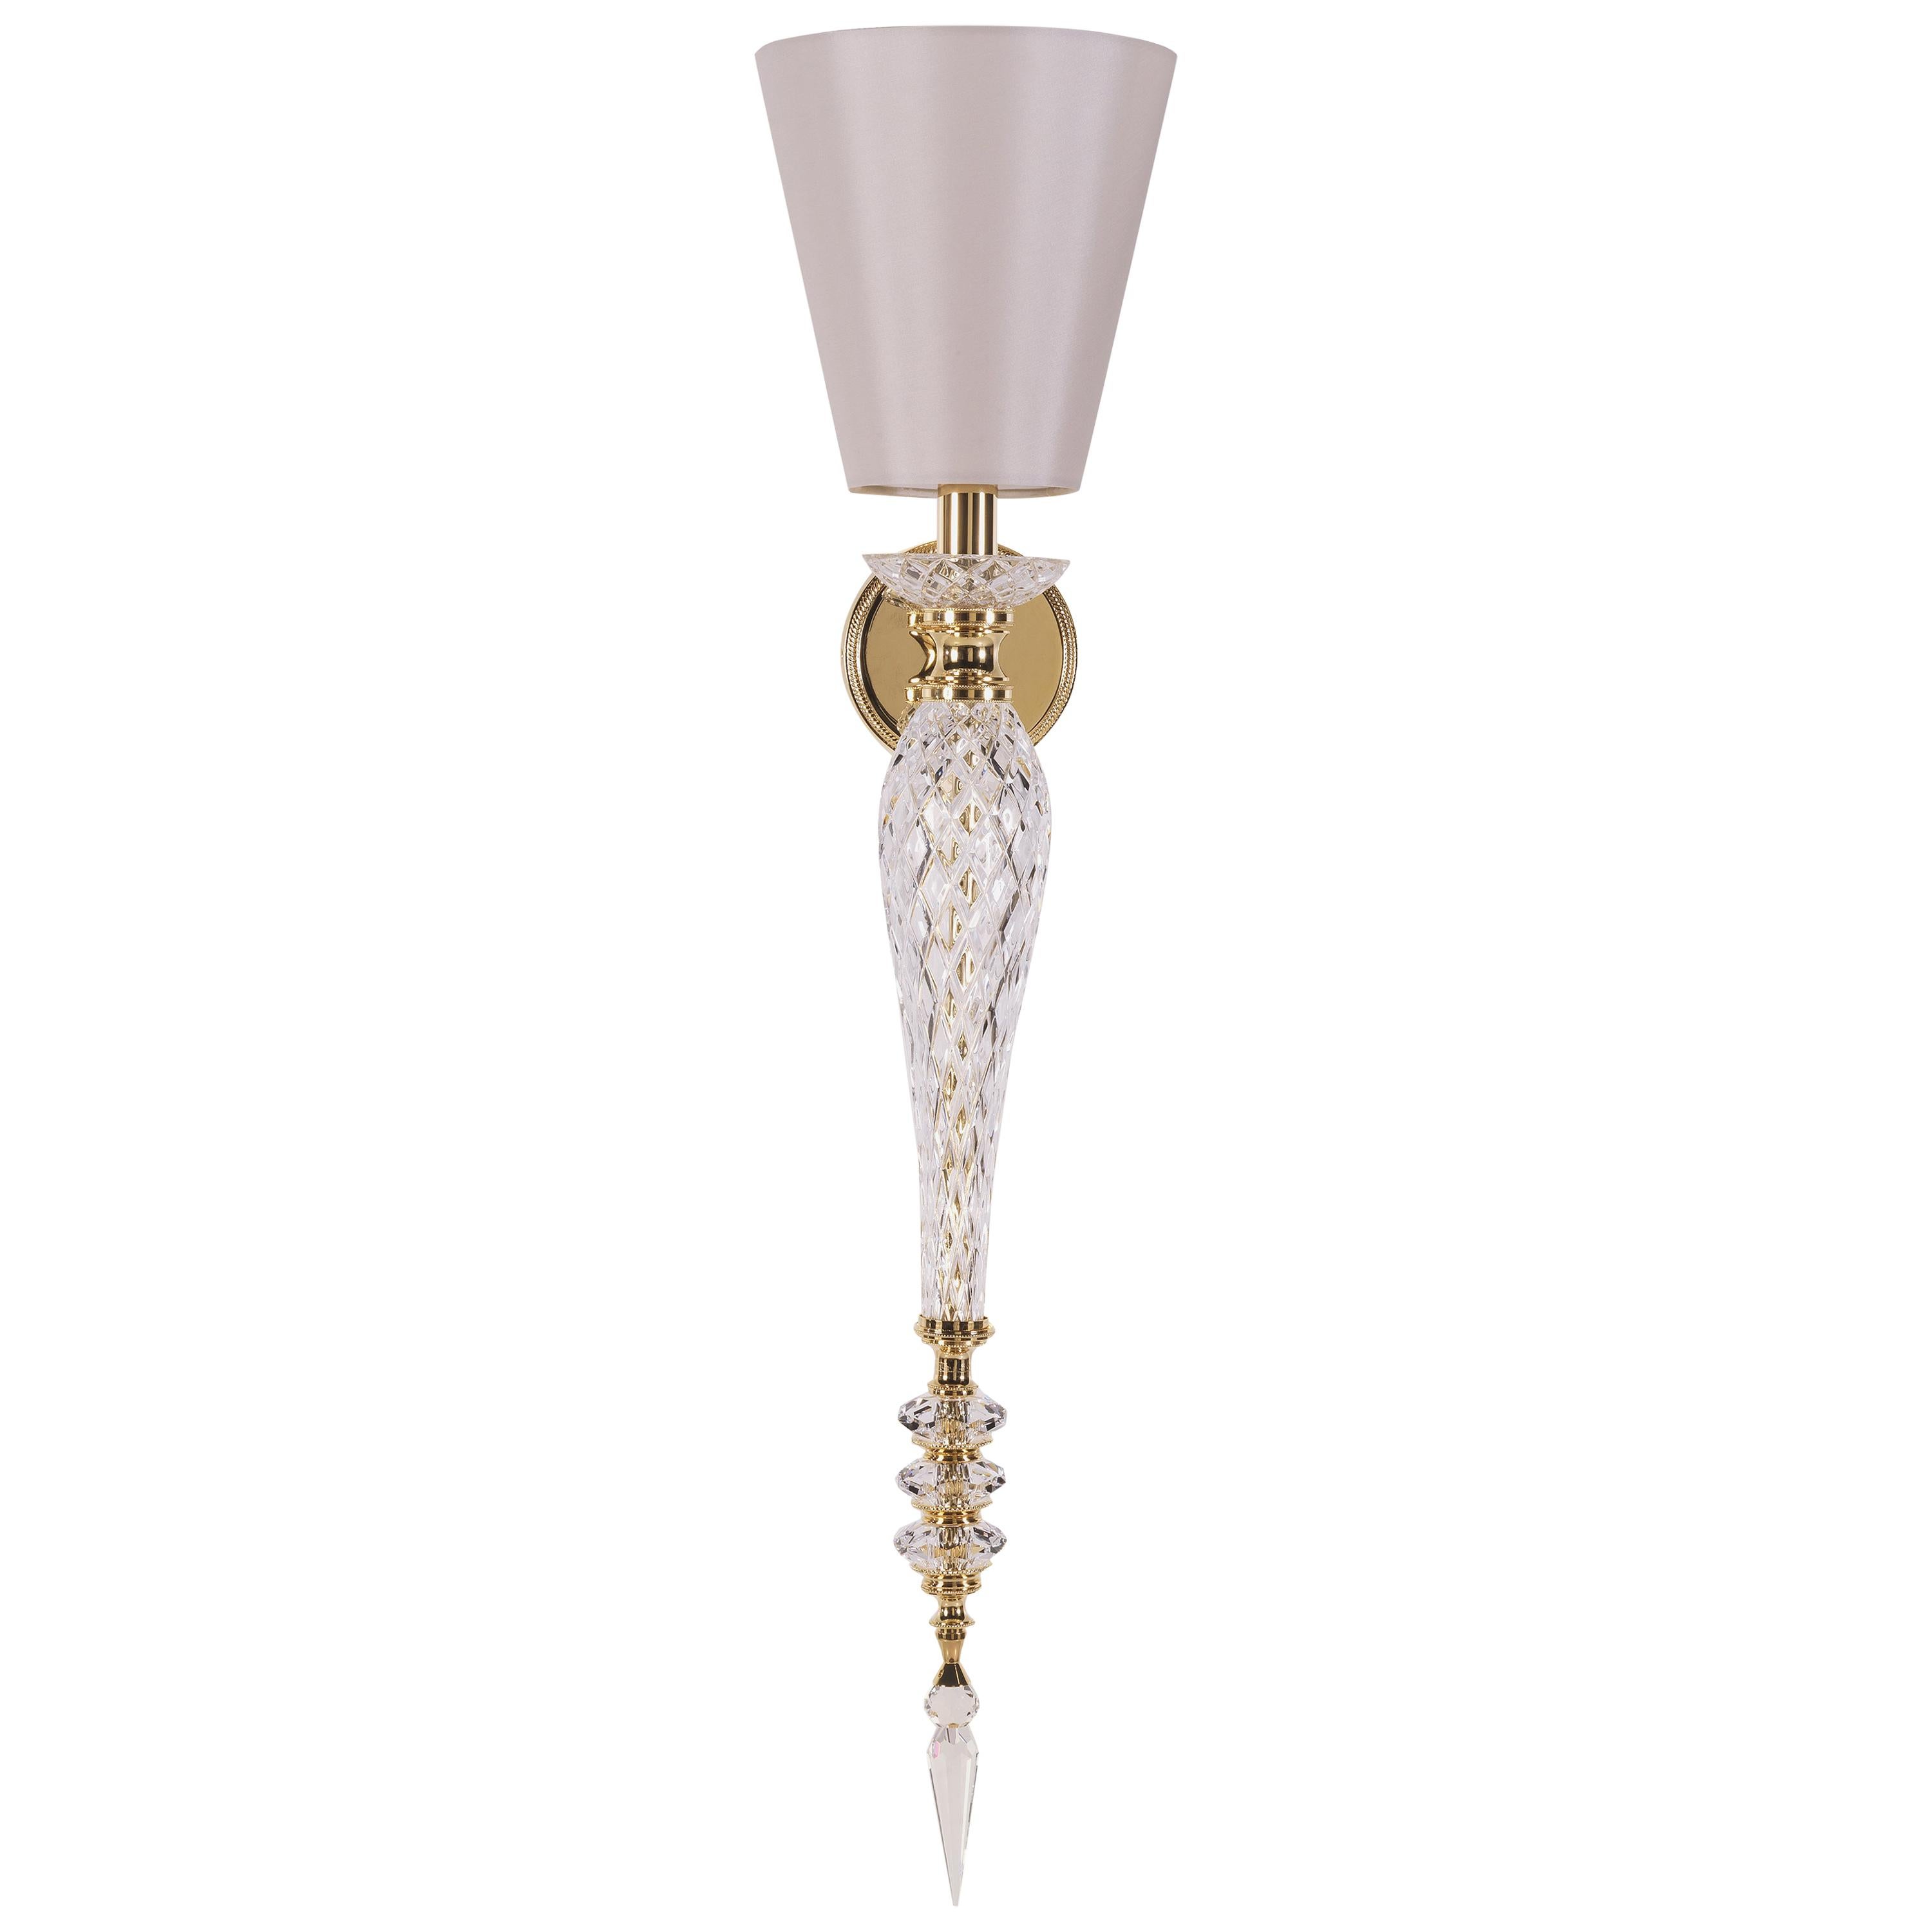 L037/W Italian Wall Lamp in Crystal and Finishing Gold 24-Karat by Zanaboni For Sale